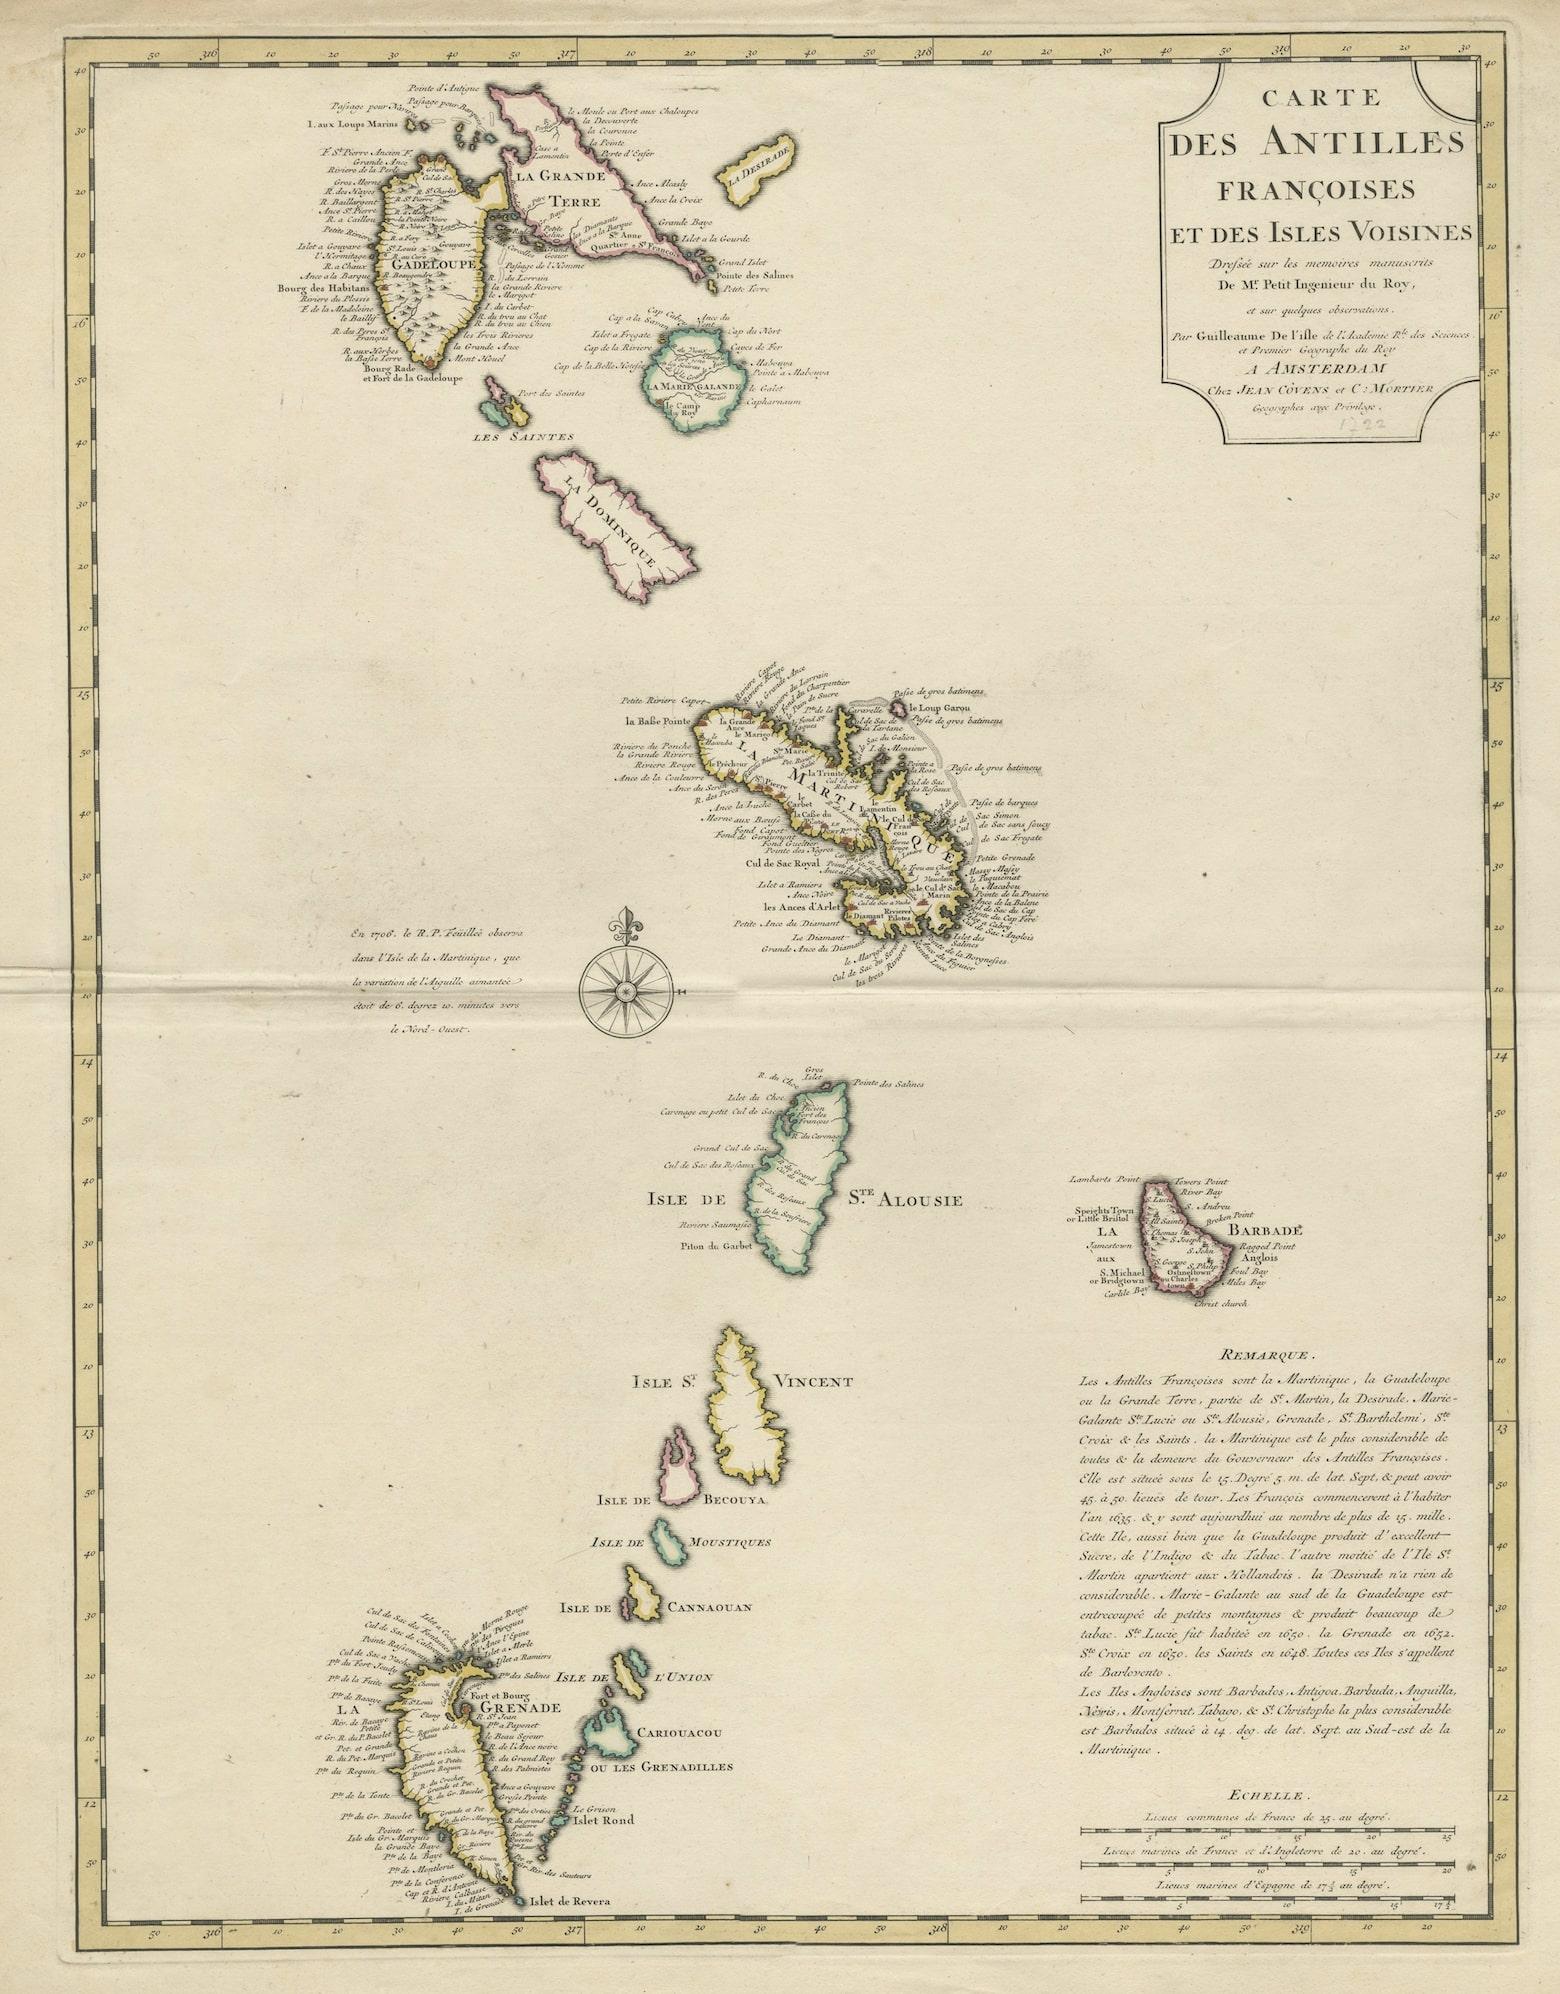 Antique map titled 'Carte des Antilles Francoises et des Isles Voisines'. Original antique map of the French Antilles, covering an area stretching from Guadeloupe in the north to Grenada in the south. This is the Amsterdam edition of the map,